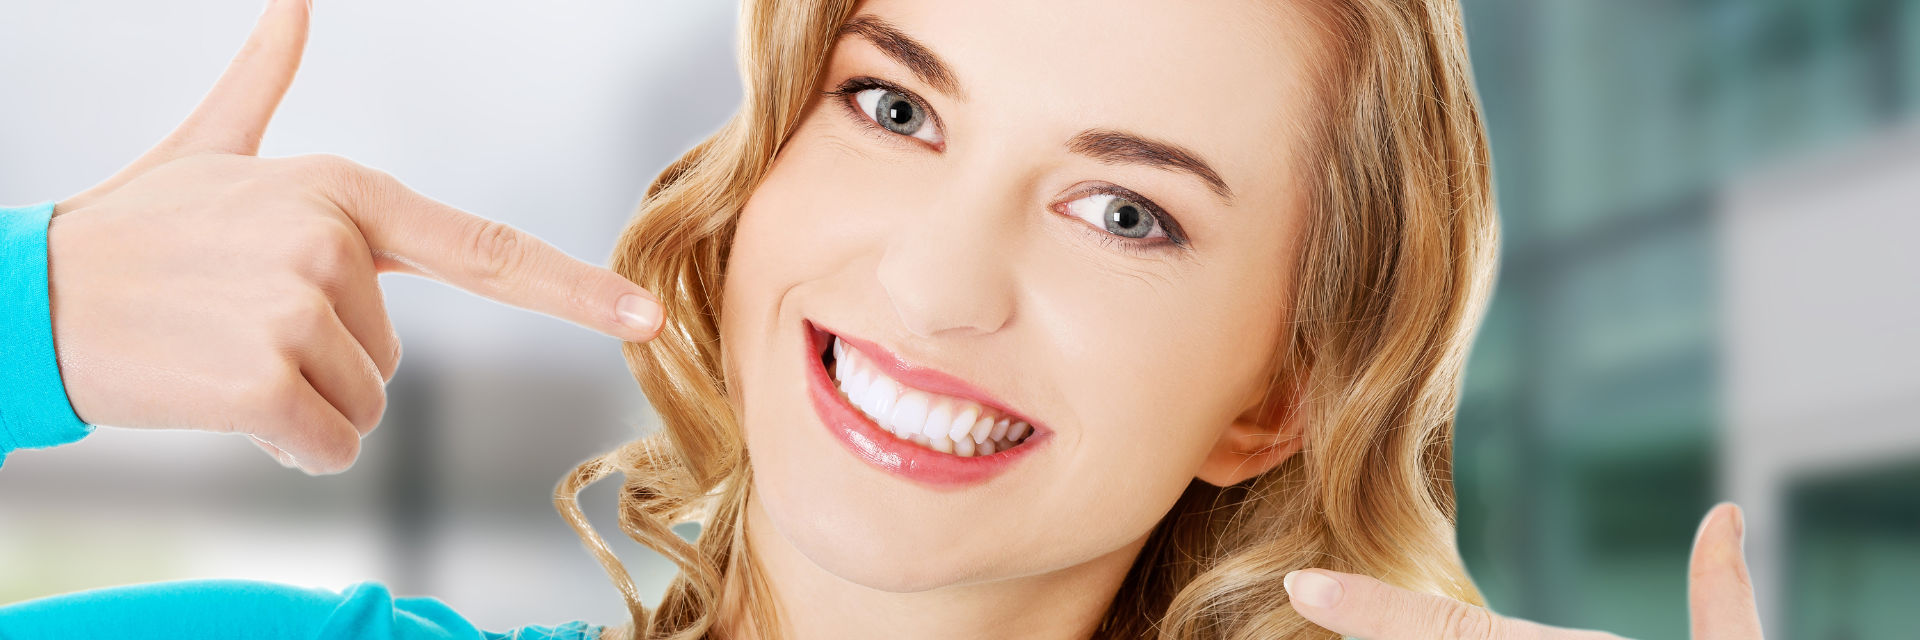 Happy young woman pointing at her beautiful whitened teeth